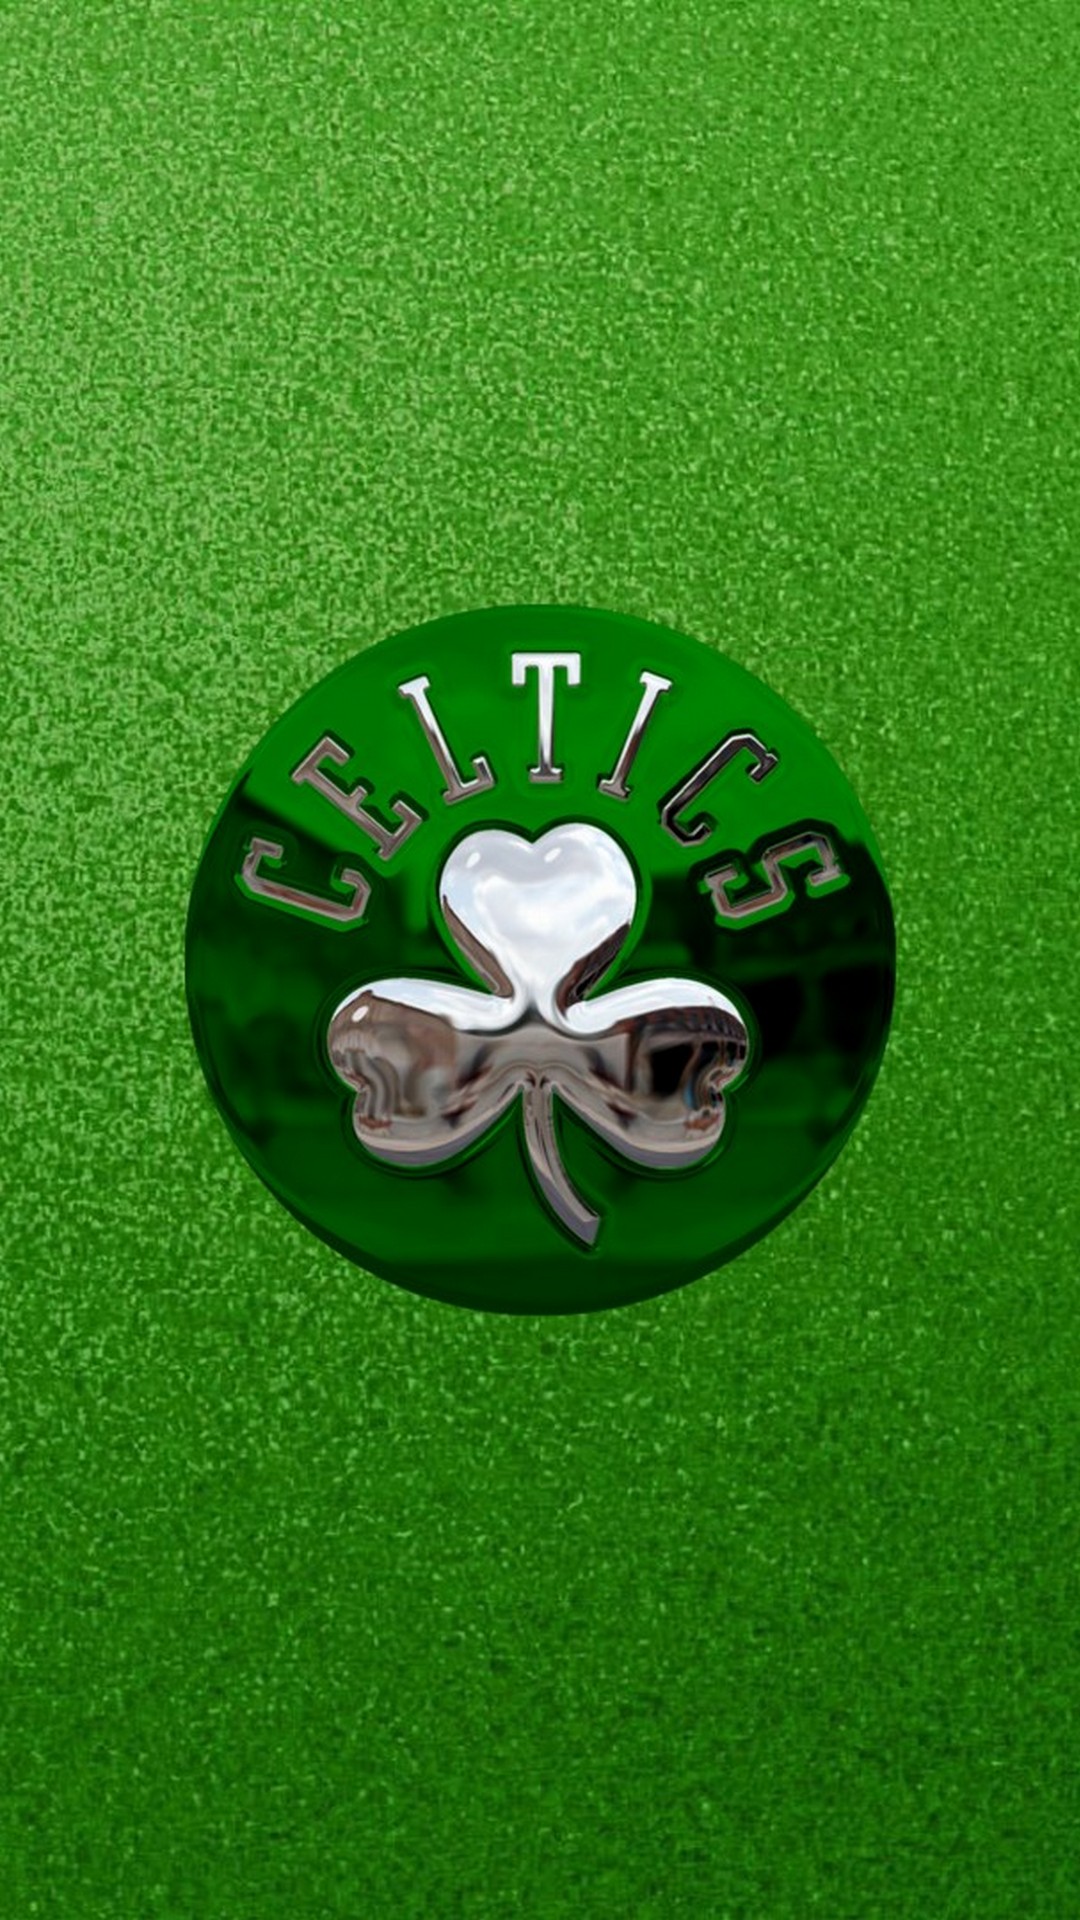 Wallpaper Boston Celtics Mobile With Resolution 1080X1920 pixel. You can make this wallpaper for your Desktop Computer Backgrounds, Mac Wallpapers, Android Lock screen or iPhone Screensavers